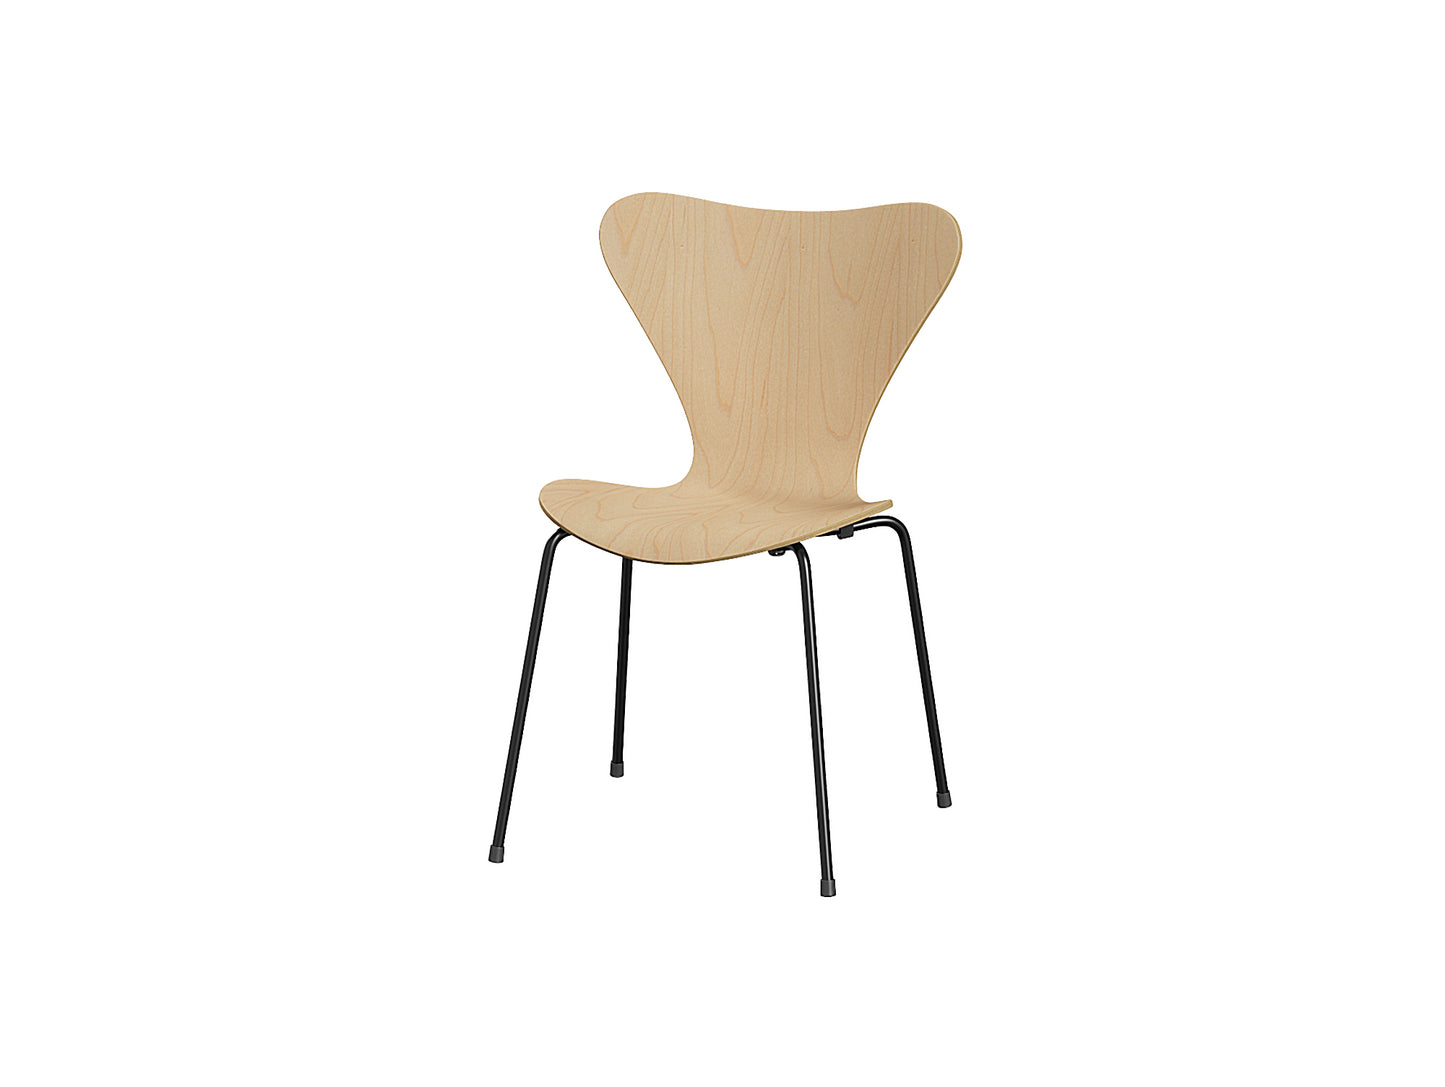 Series 7 Dining Chair (Clear Lacquered Wood) by Fritz Hanse - Maple / Black Steel